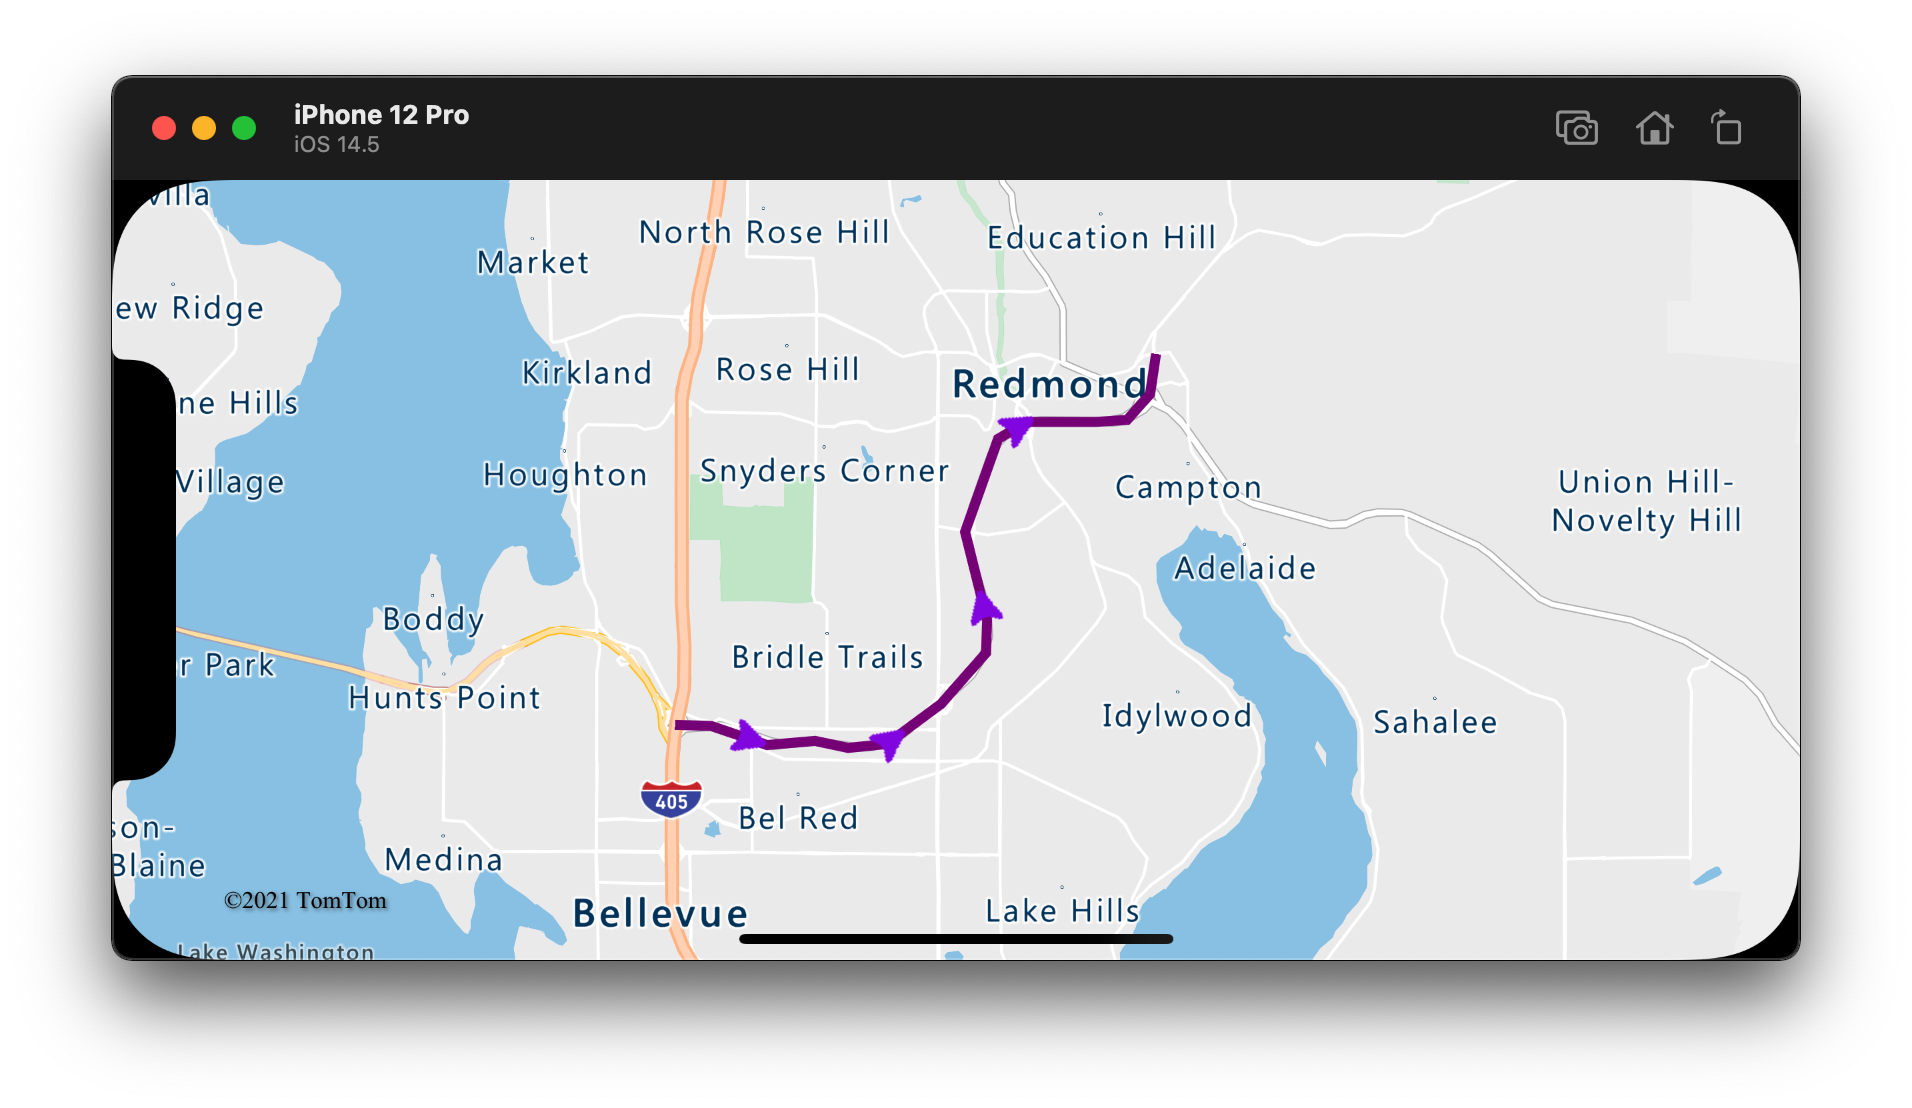 A line with purple arrow icons displayed along it pointing in the direction of the route.